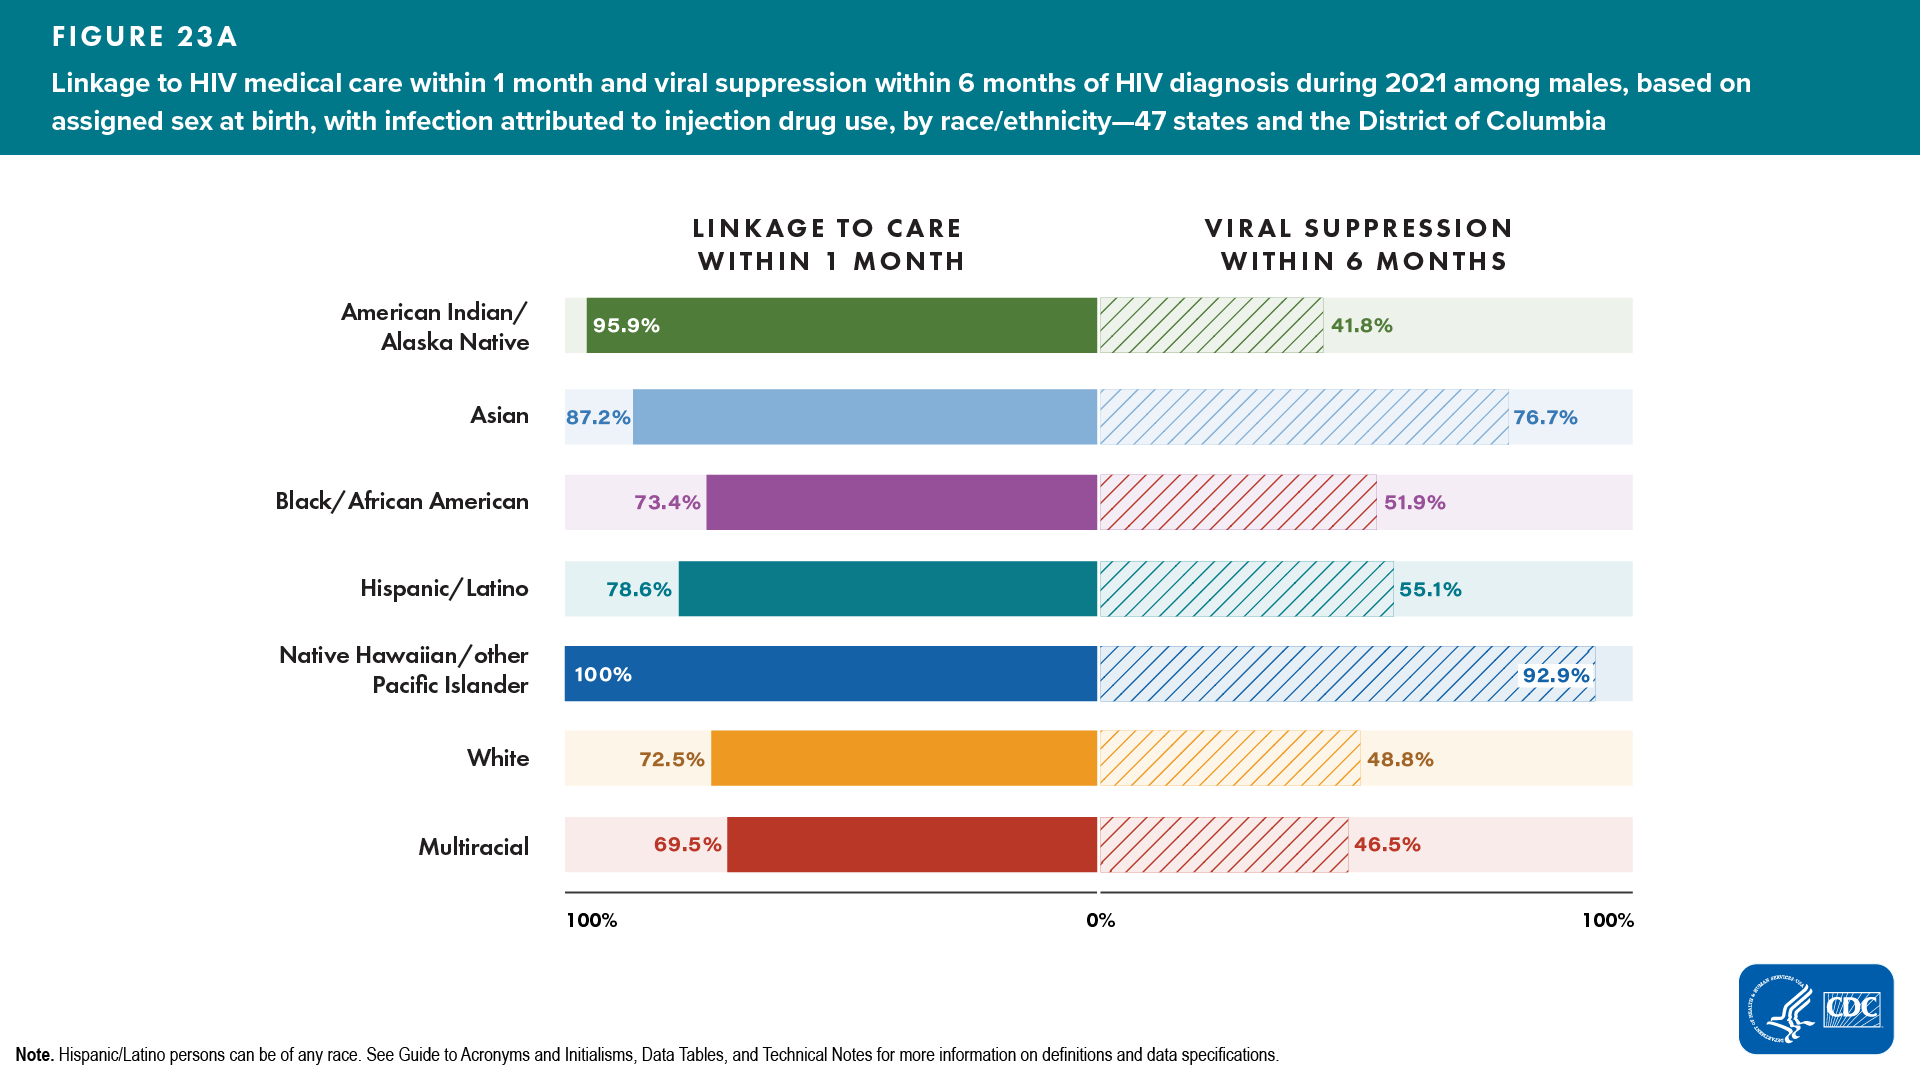 Figure 23a. Linkage to HIV medical care within 1 month and viral suppression within 6 months of HIV diagnosis during 2021 among males, based on assigned sex at birth, with infection attributed to injection drug use, by race/ethnicity — 47 states and the District of Columbia